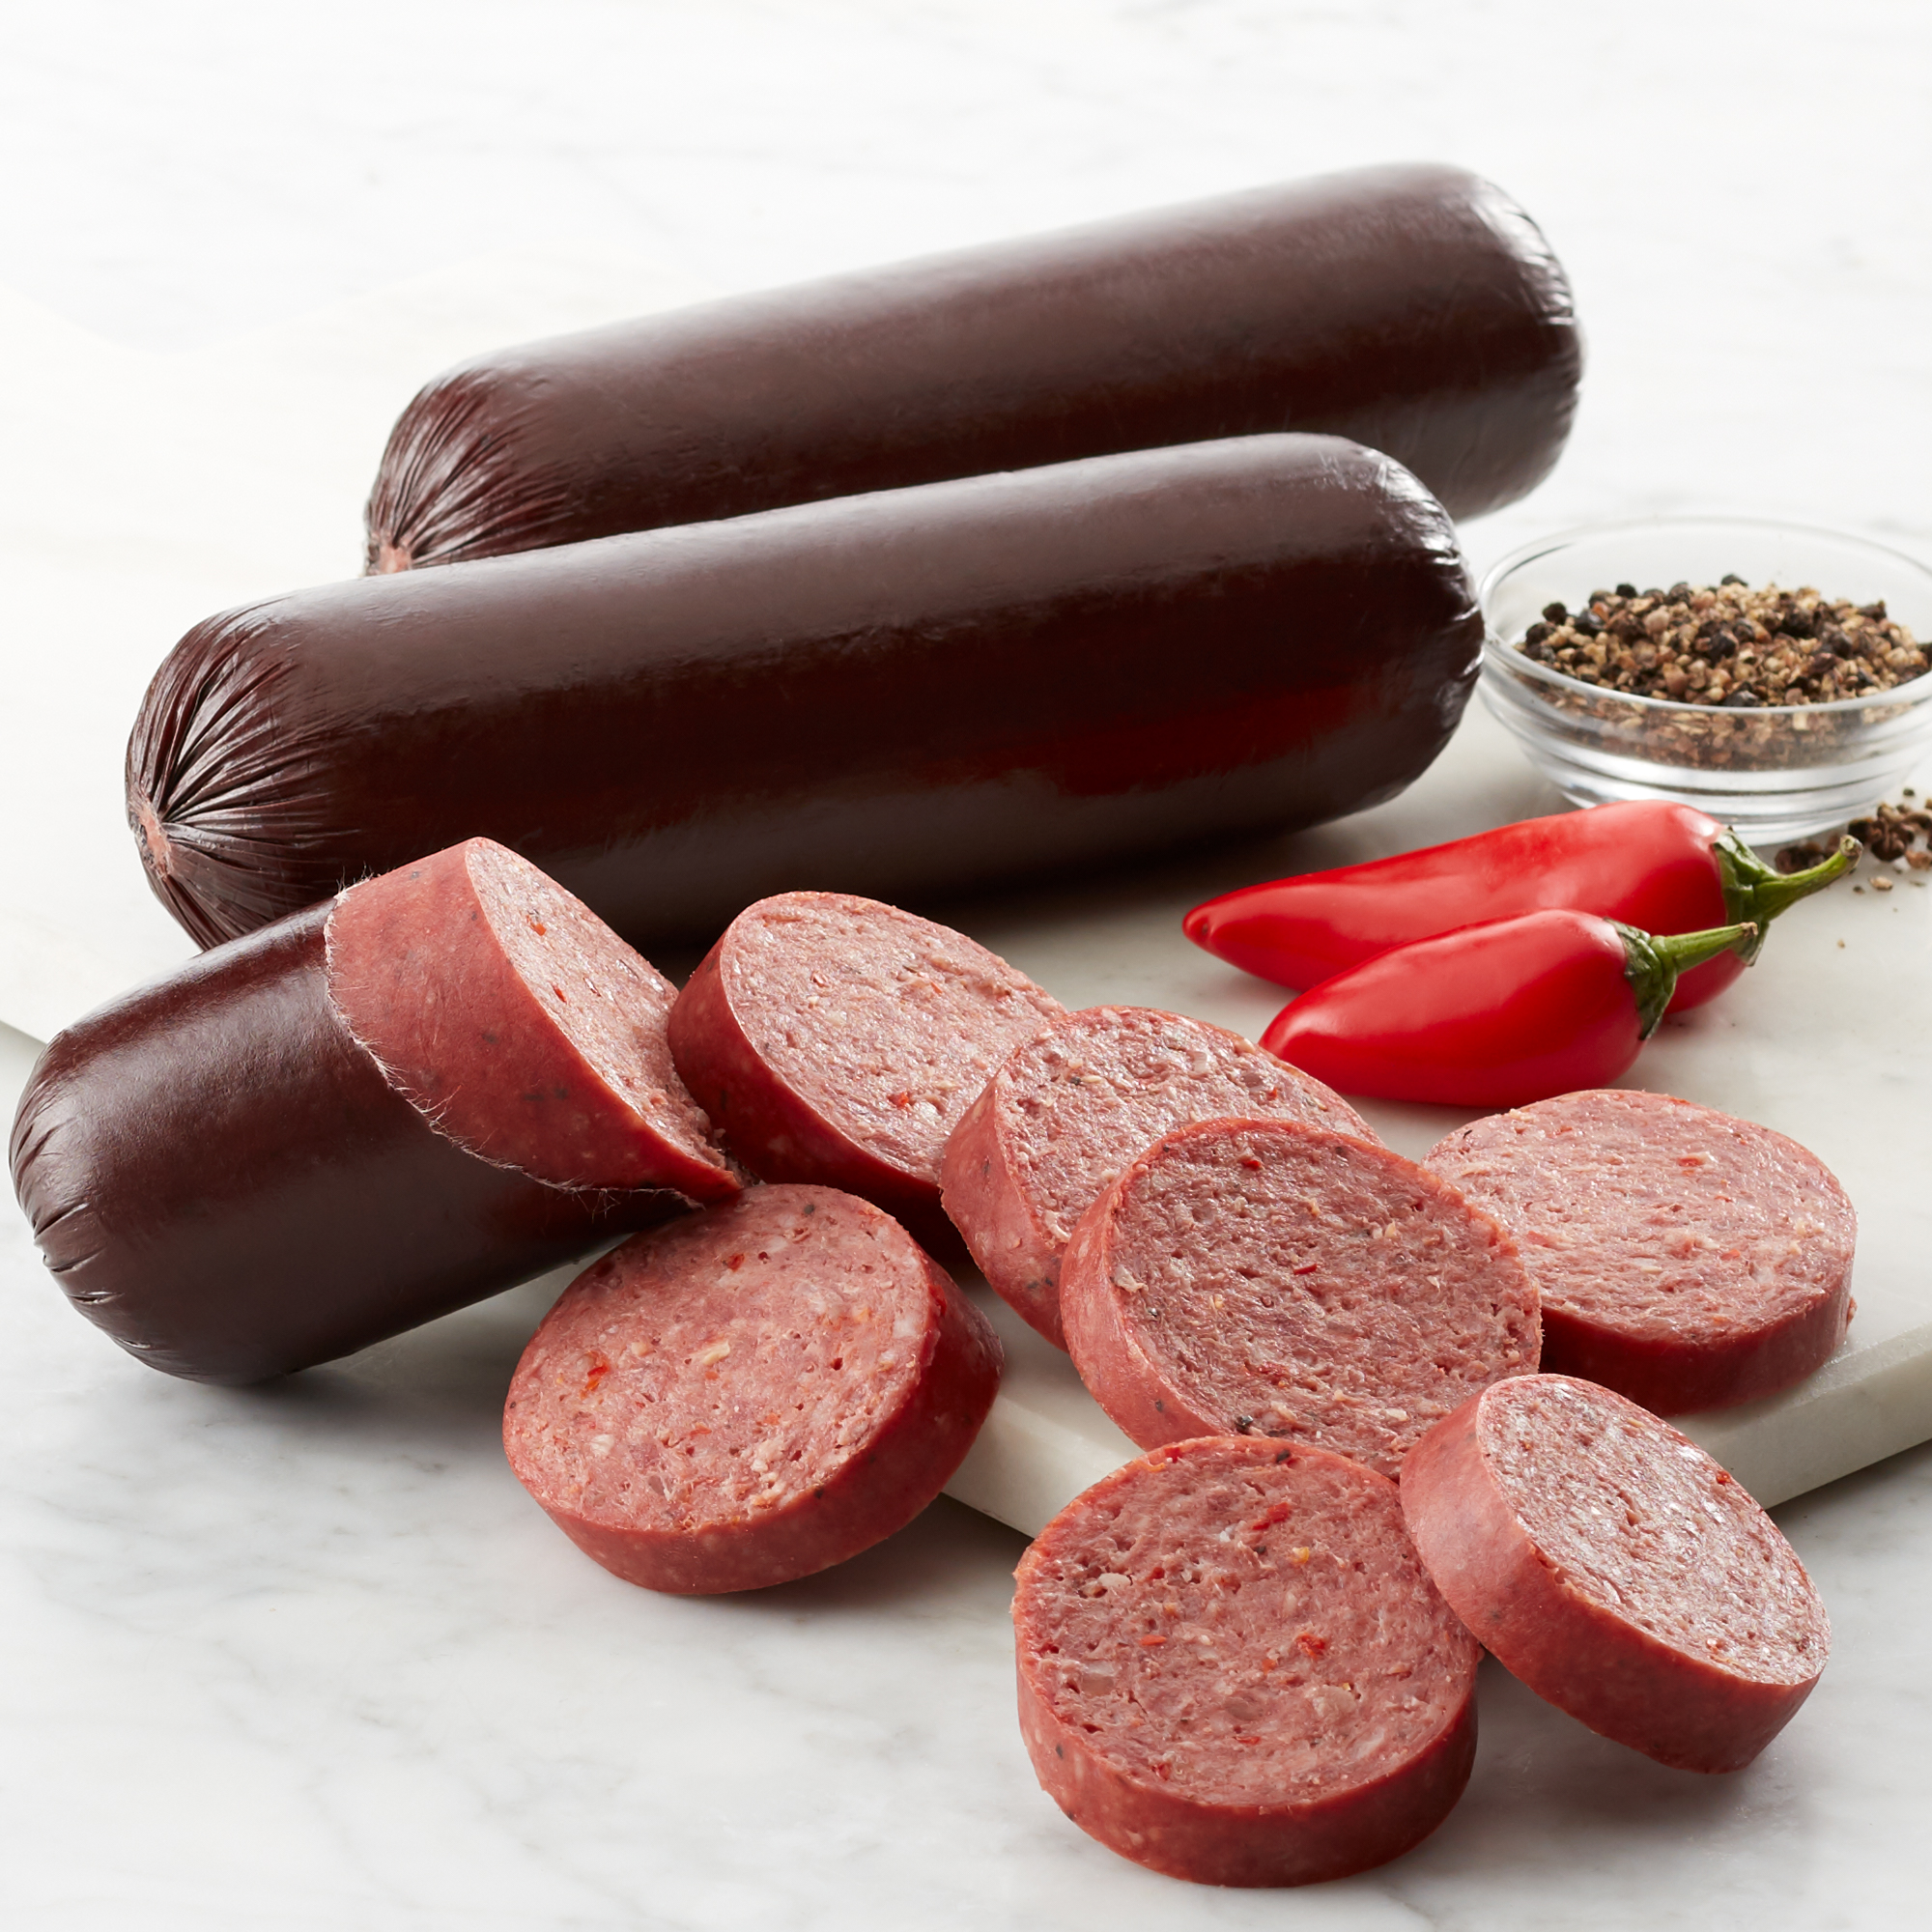 https://www.hickoryfarms.com/on/demandware.static/-/Sites-Web-Master-Catalog/default/dwf19cc353/images/products/spicy-beef-summer-sausage-3083-1.jpg